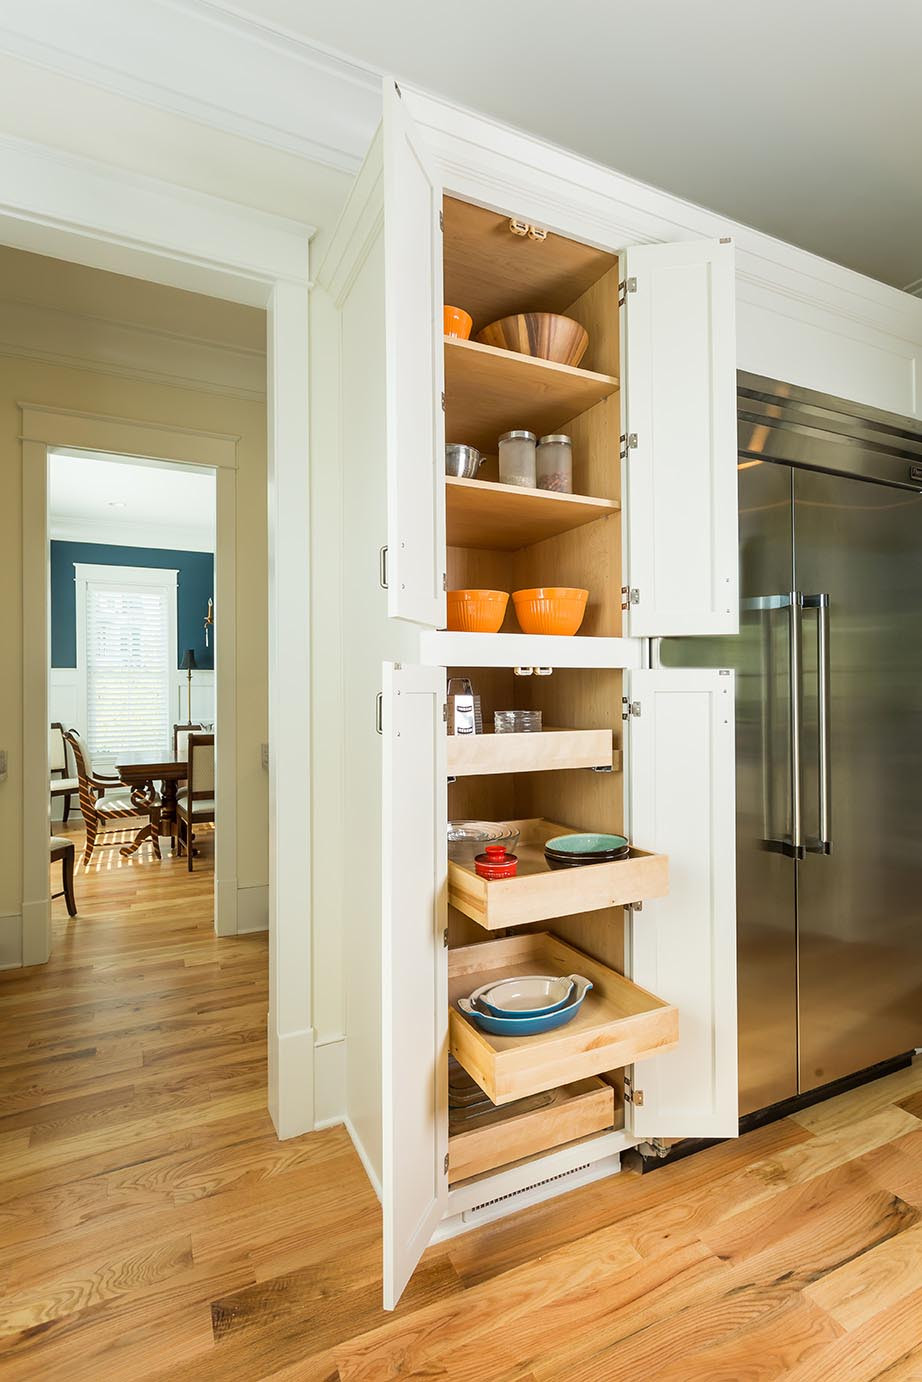 White Pantry Cabinets For Kitchen
 Luxury South Carolina Home features Inset Shaker Cabinets